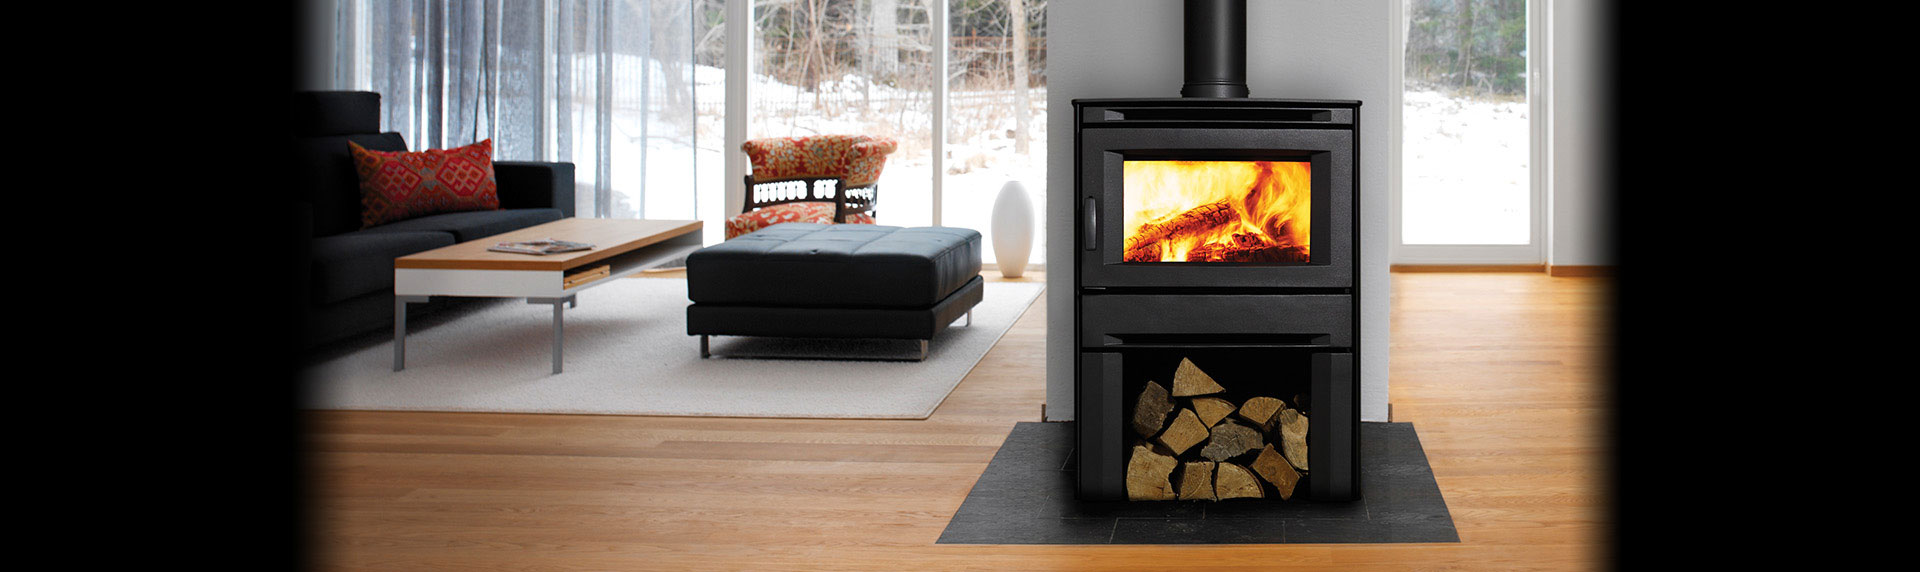 Modern Black Wood Stove with space for holding wood on black hearth pad